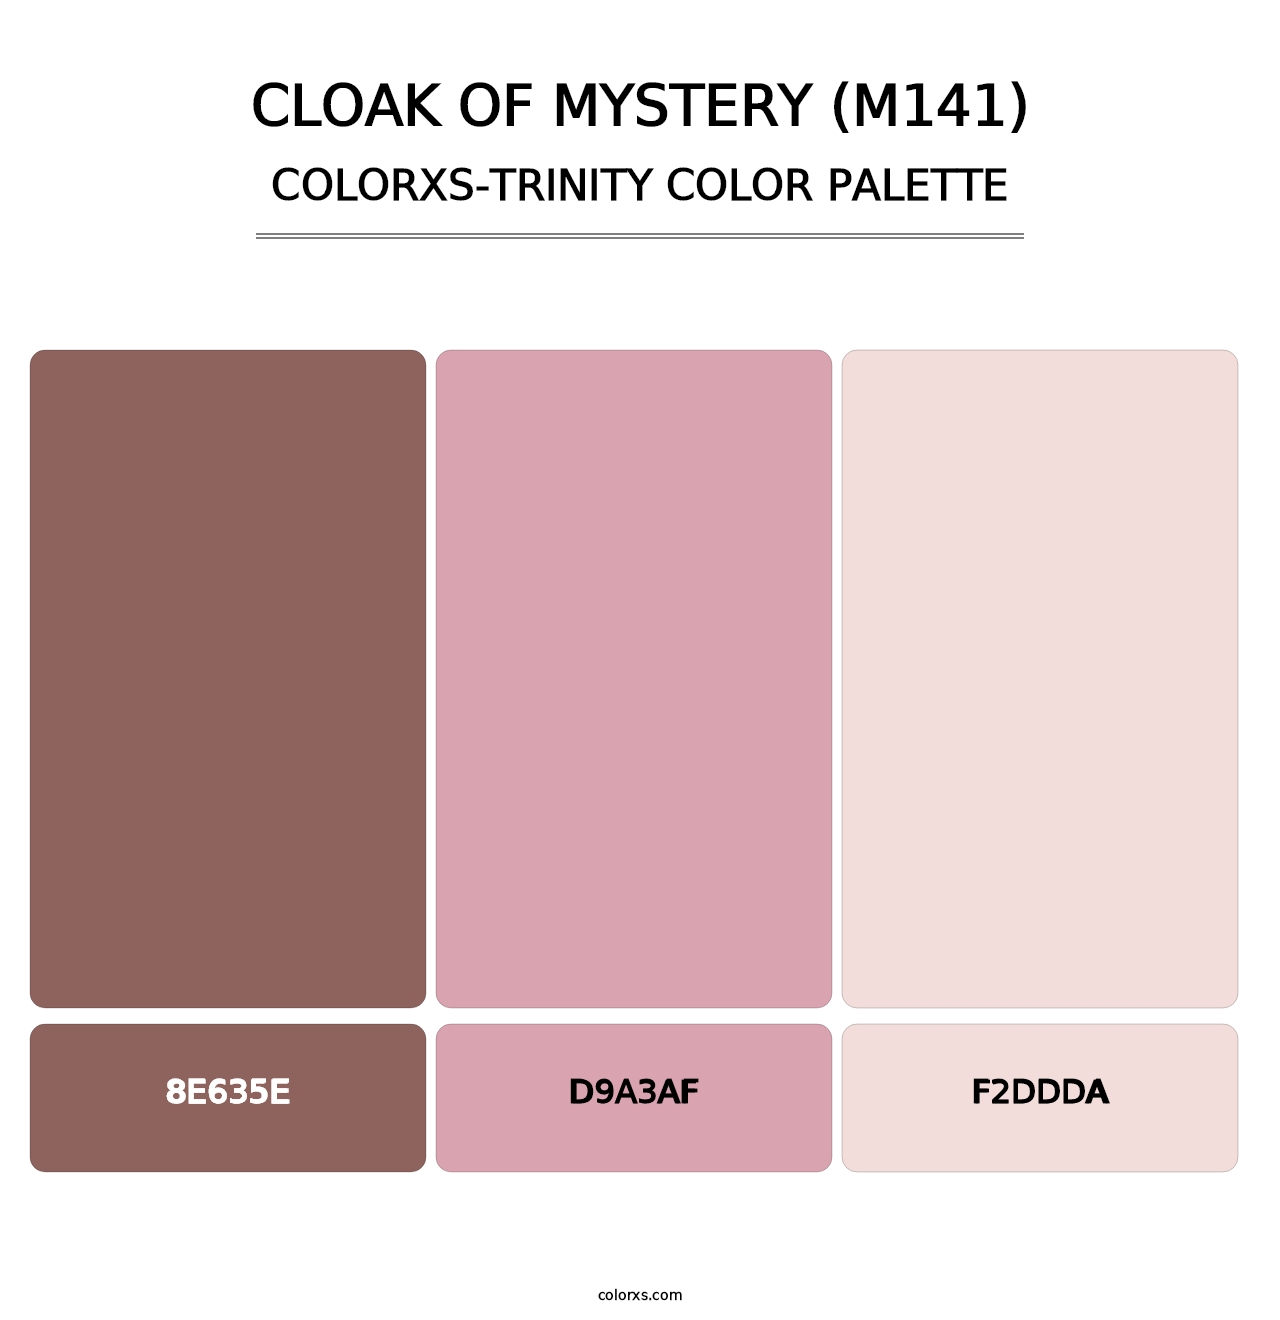 Cloak of Mystery (M141) - Colorxs Trinity Palette